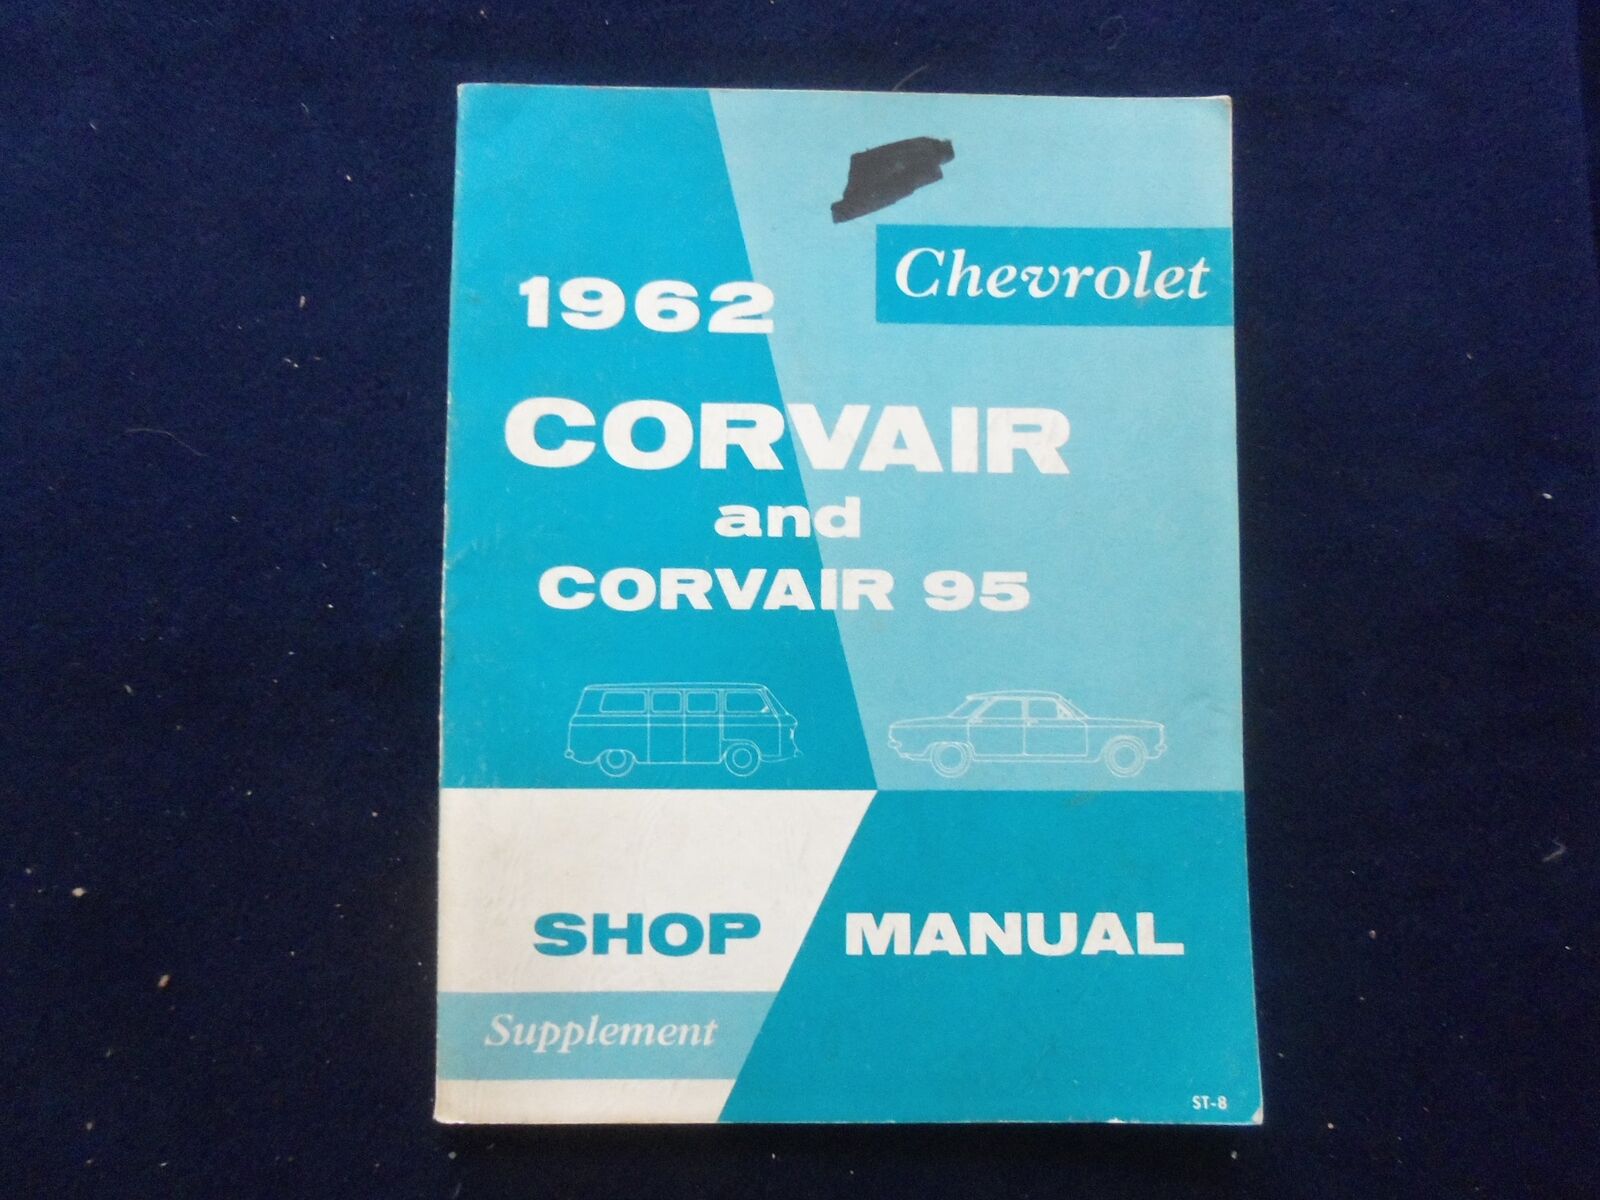 1962 CHEVROLET CORVAIR AND CORVAIR 95 SHOP MANUAL - SOFTCOVER MANUAL - KD 8878